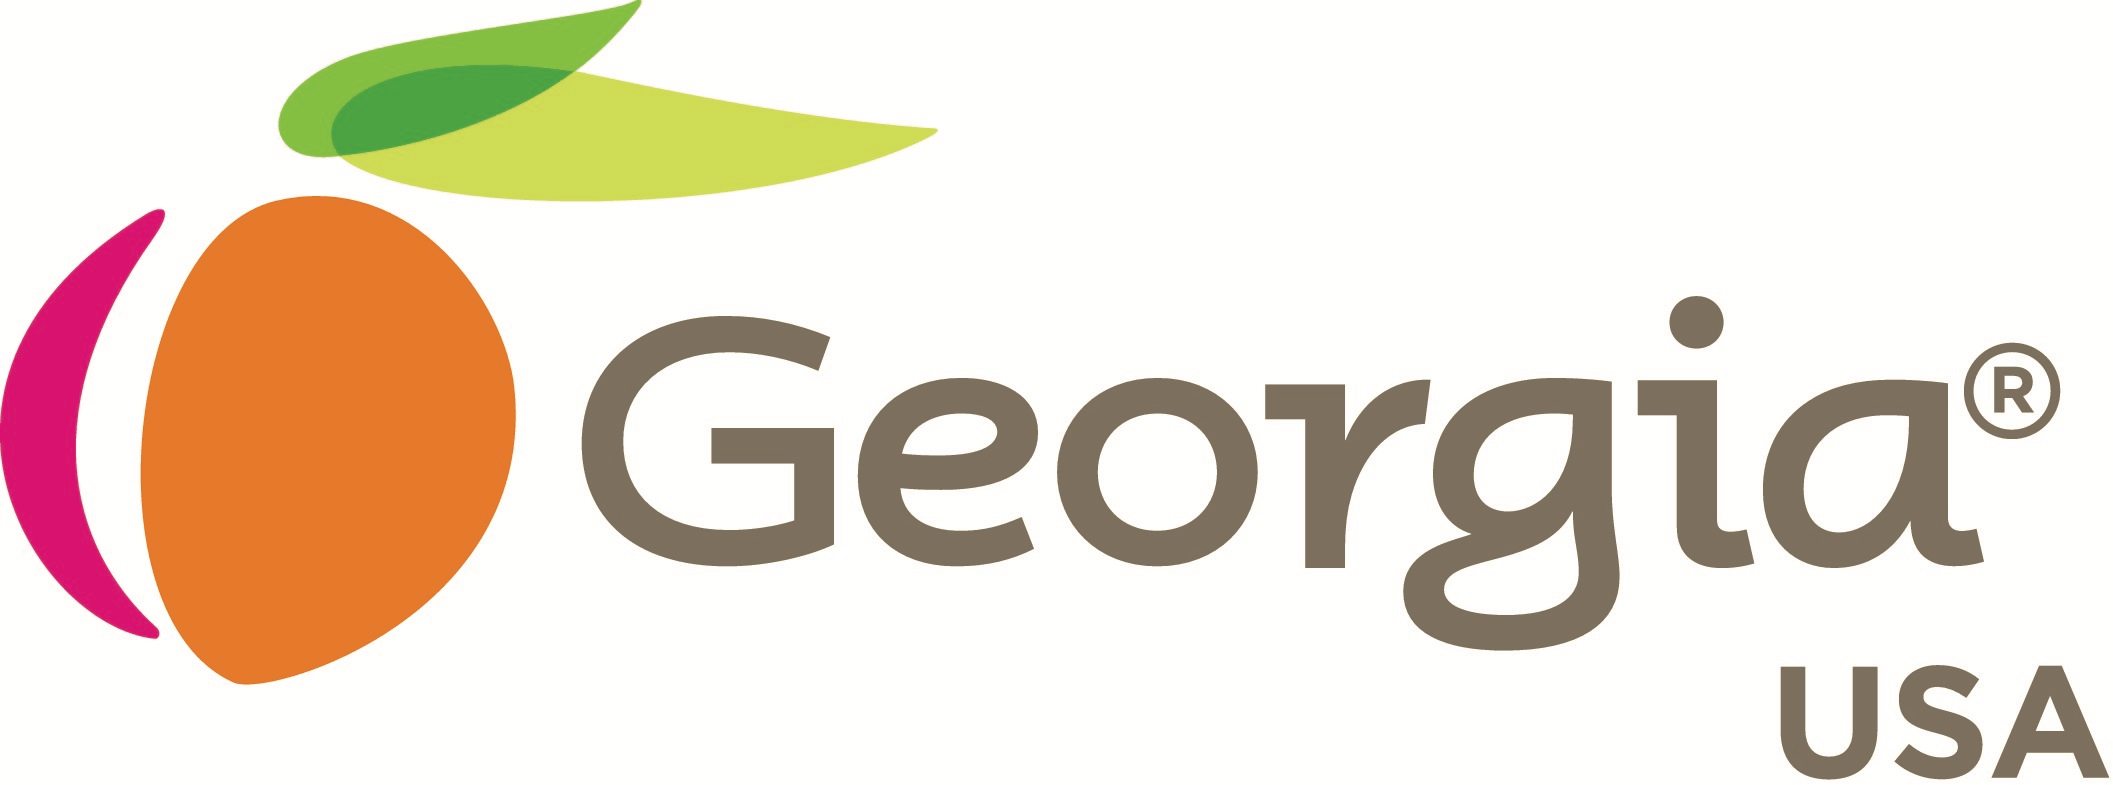 USA Georgia Logo - Georgia Centers for Innovation Logo.png | Institute for People and ...